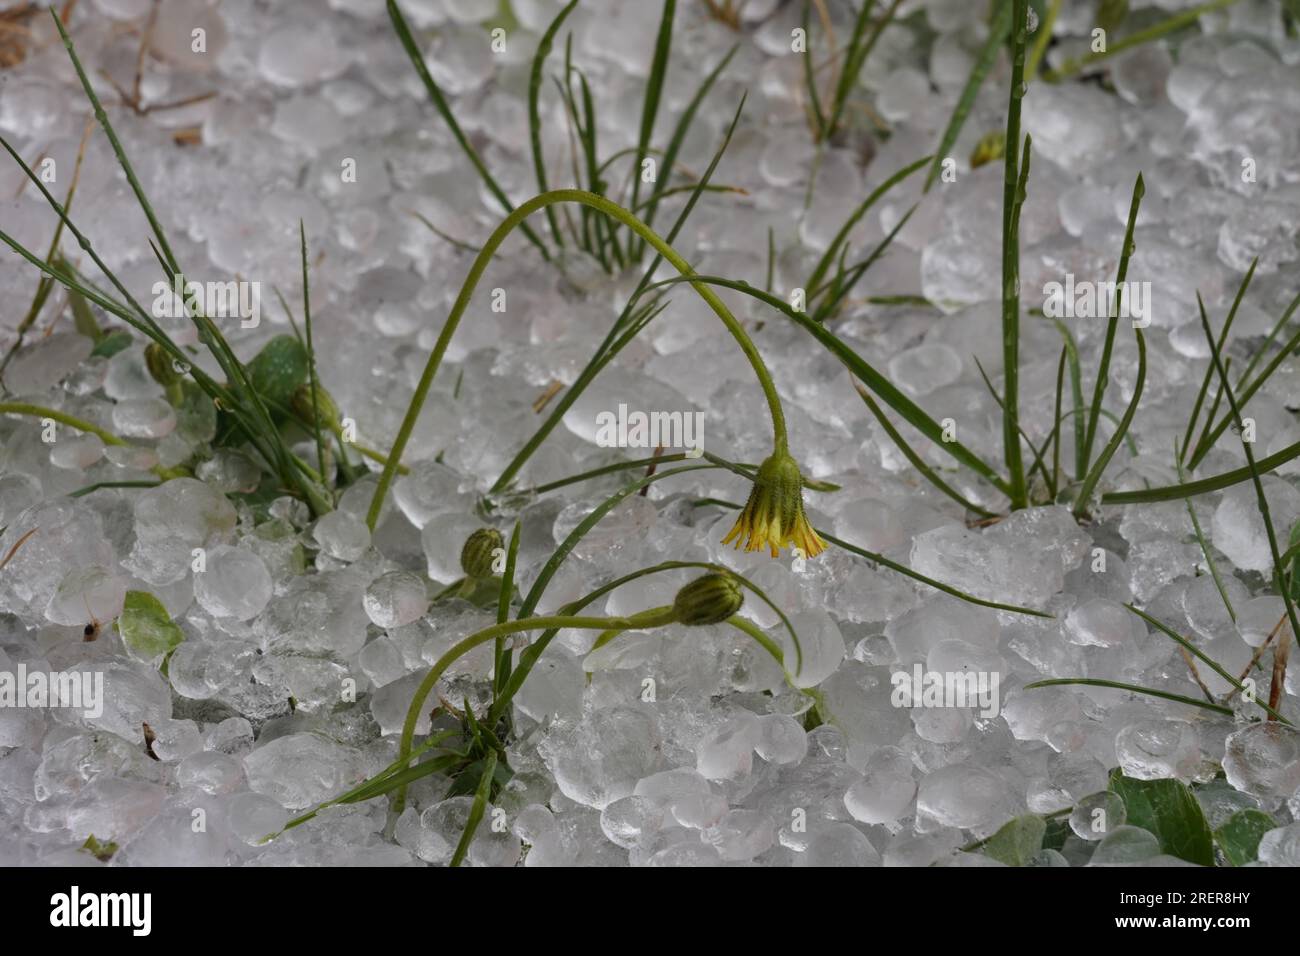 Hailstones spread on the grass as a result of a heavy summer hailstone. Stock Photo